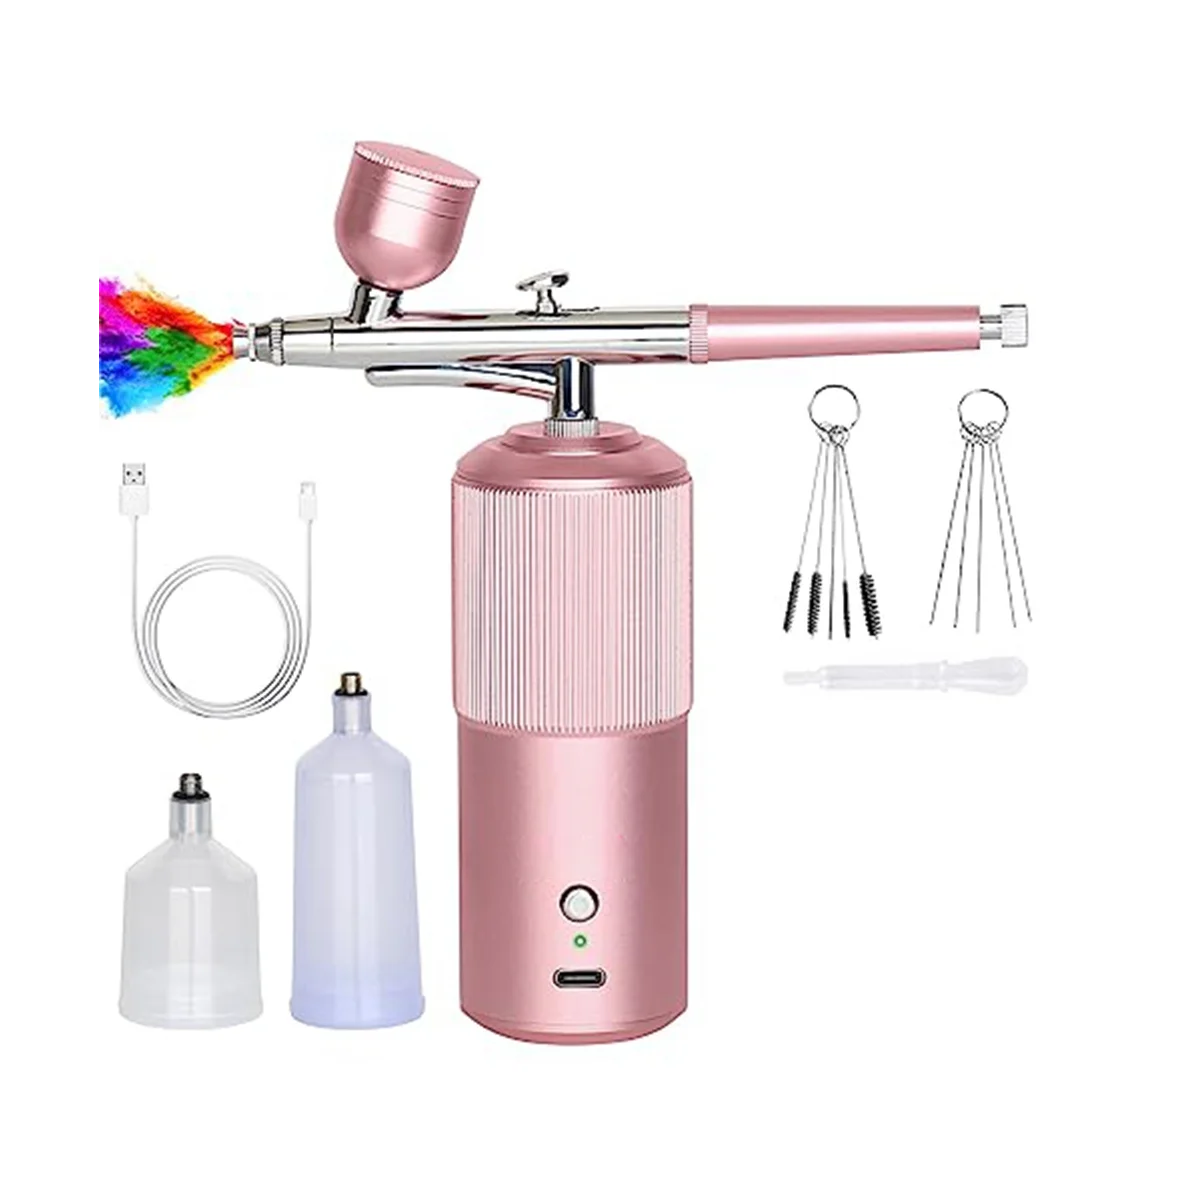 

Airbrush Kit - Rechargeable Handheld Airbrush Compressor, Professional Cordless Auto AirbrushGun, for Nail Art, Makeup A